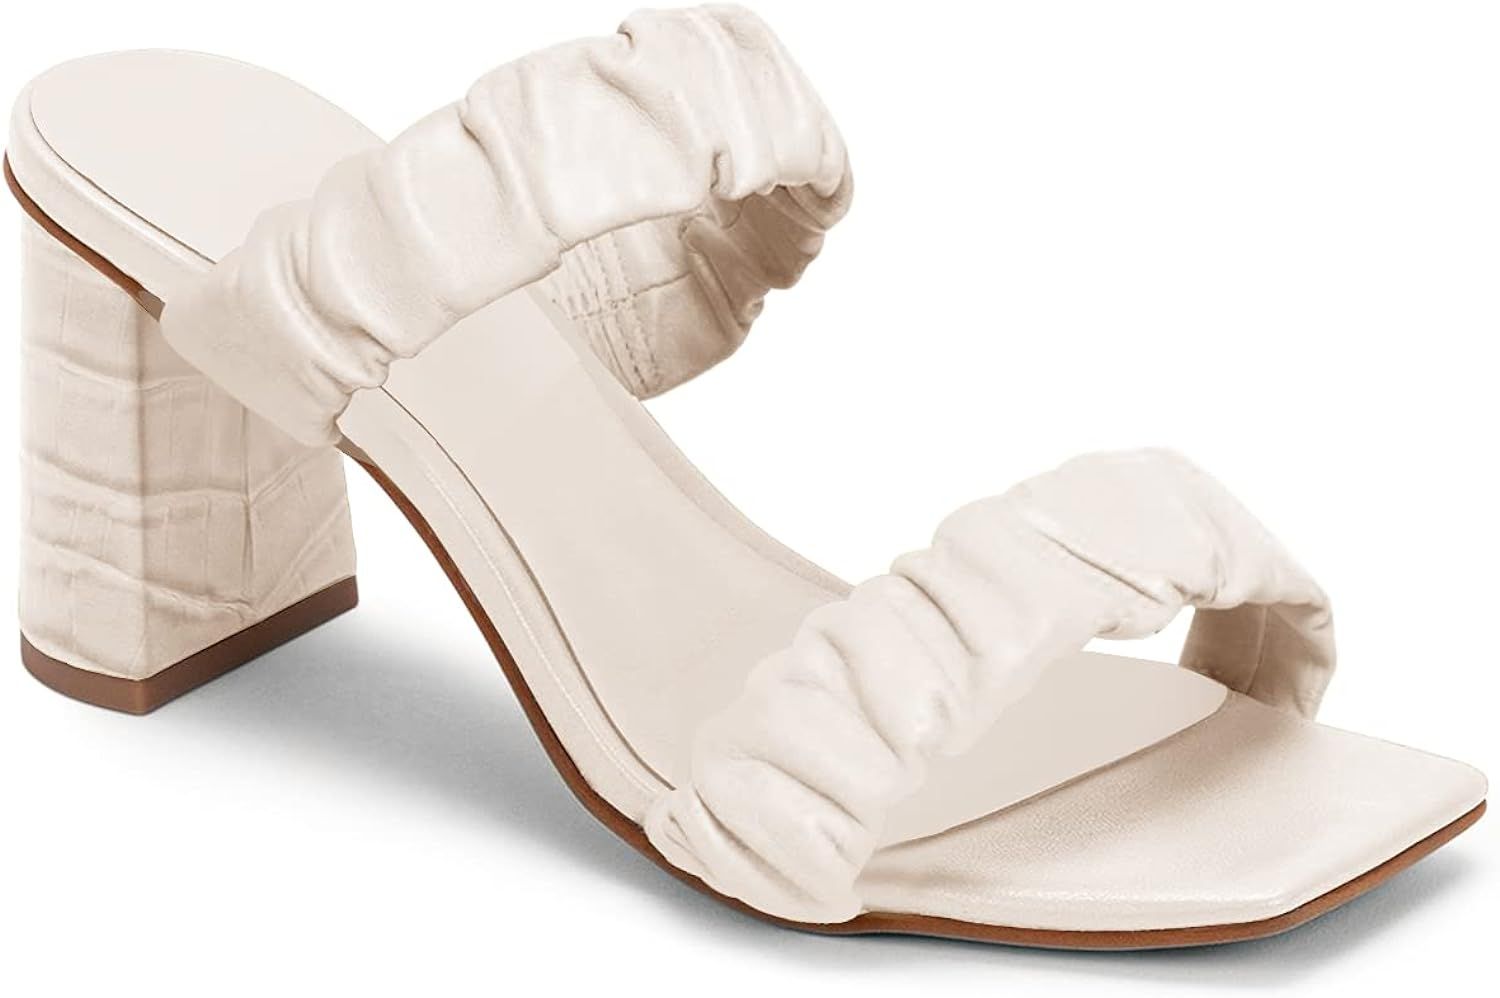 Womens ruffled Heeled Sandals Square Open Toe Strappy Slip On Summer Slide Shoes | Amazon (US)